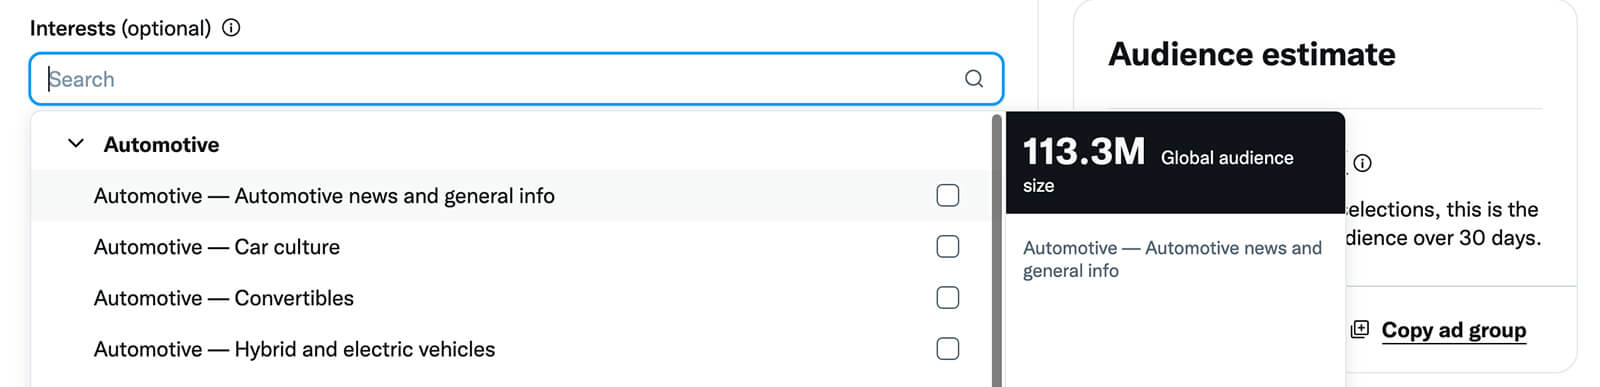 how-to-scale-twitter-ads-expand-your-target-audience-layer-more-additive-targeting-recommendations-tool-interests-dropdown-menu-related-categories-example-12